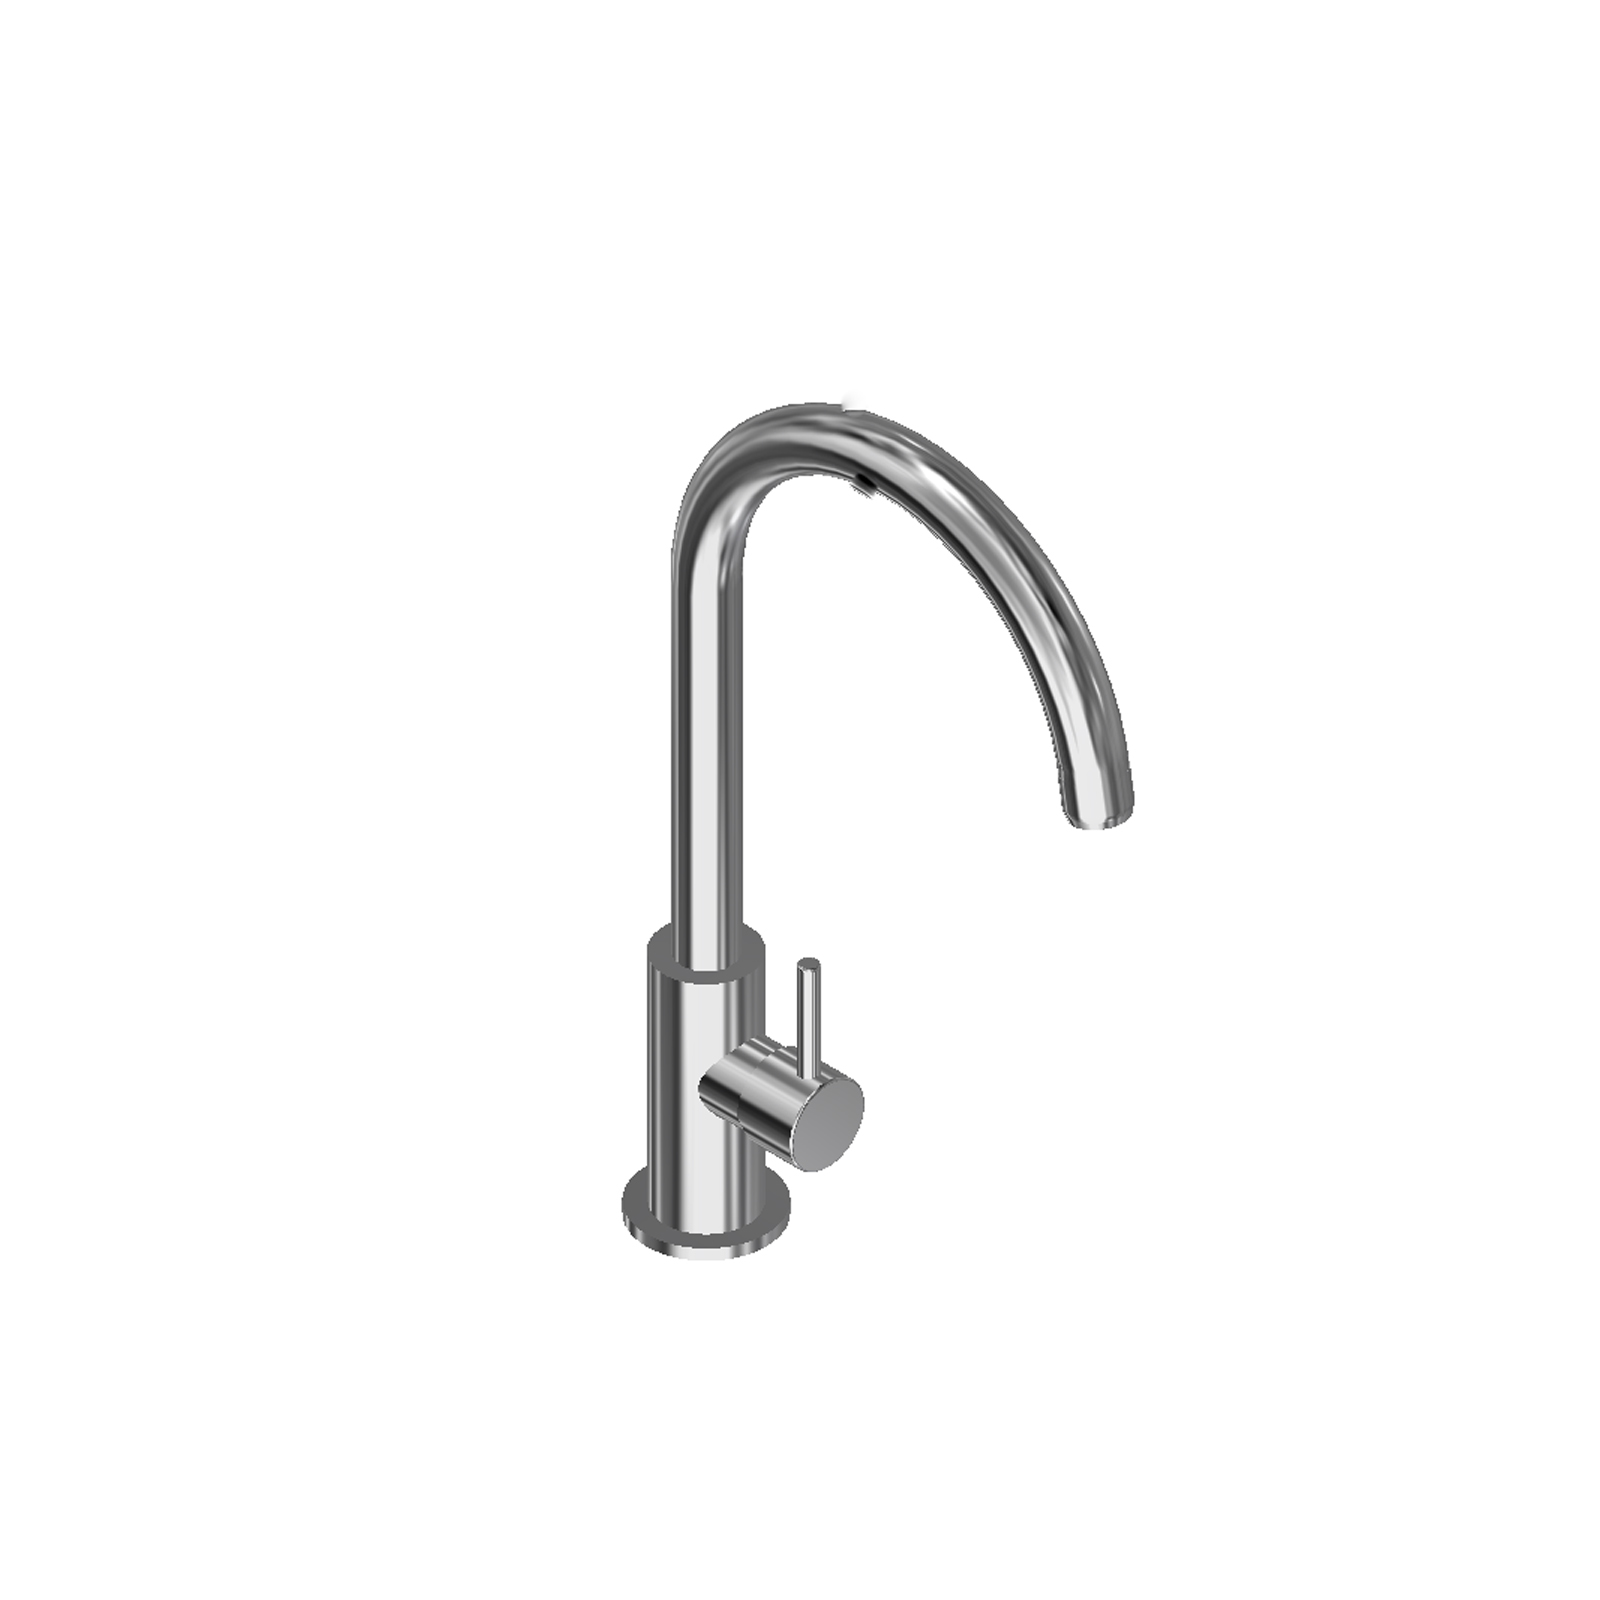 Single-control mixer for sink with lateral lever and swivel spout.